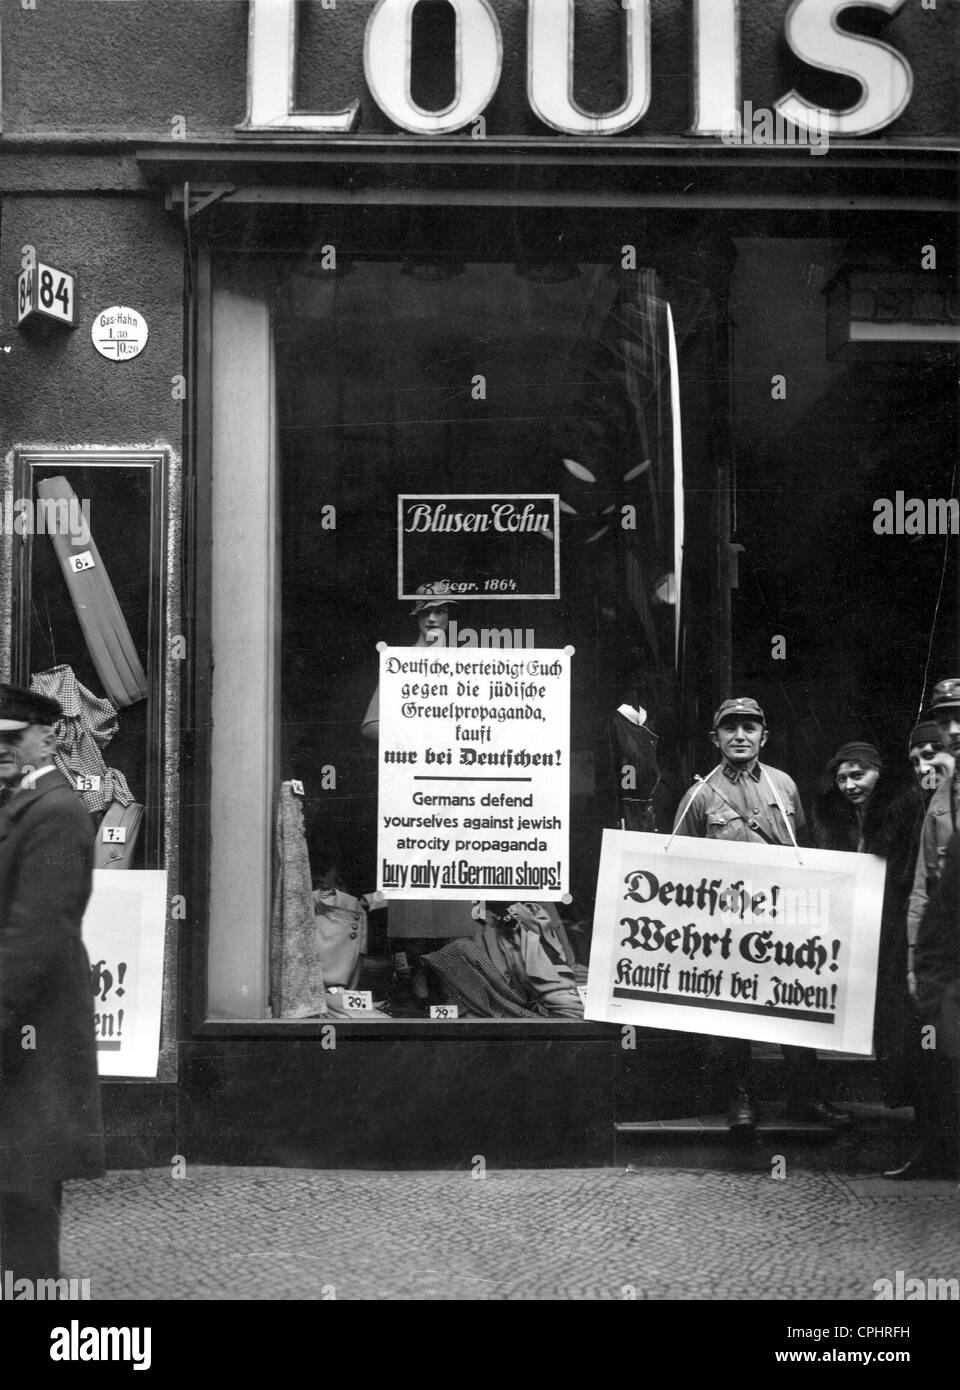 SA men stand guard outside a Jewish-owned clothing store, encouraging a public boycott, Berlin, 1933 (b/w photo) Stock Photo